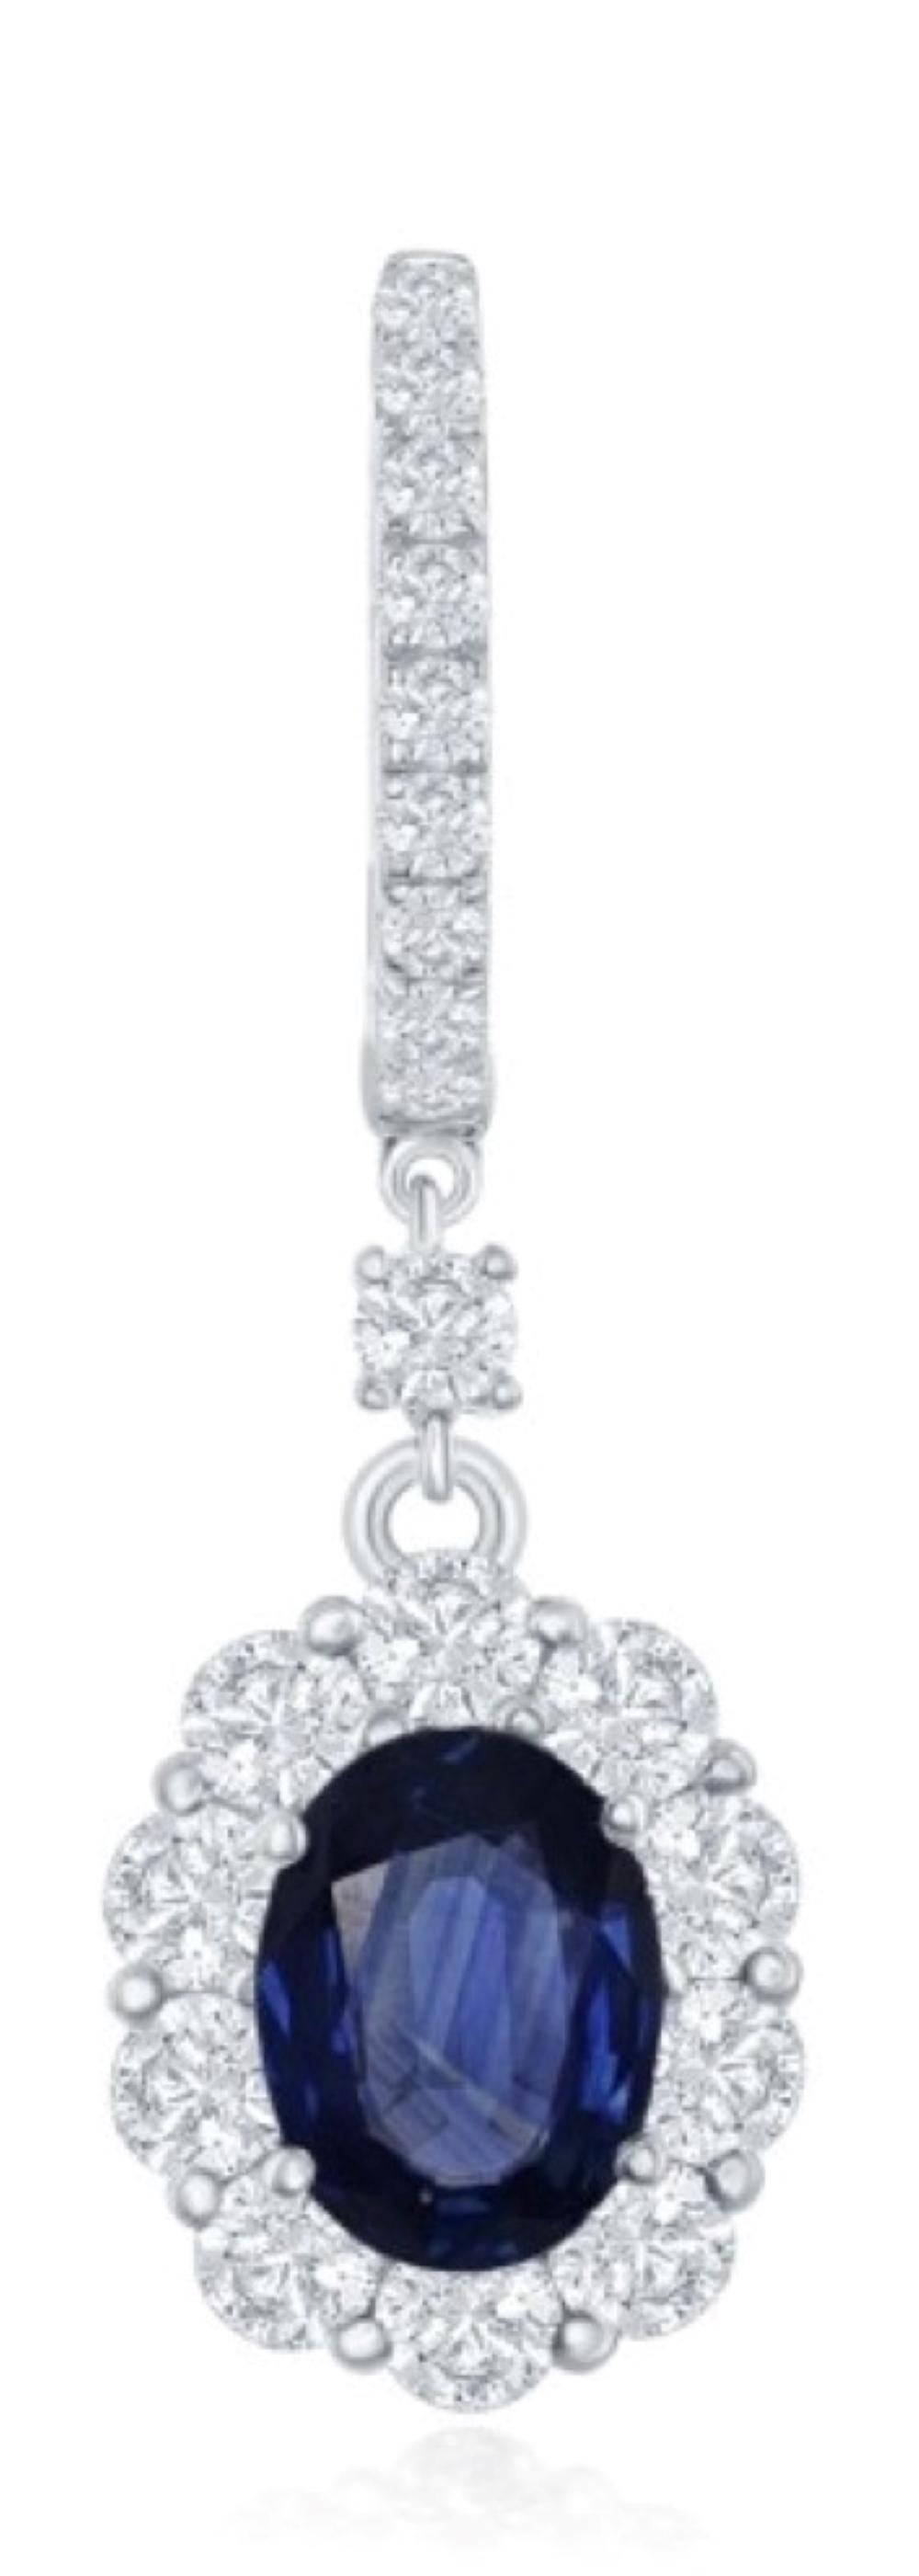 Beautiful drop style earrings articulate gently in the with light movement to throw brilliance and beauty in all directions. The two oval brilliant blue sapphires total 1.85ct and there are 1.74 ct of accenting round brilliant cut diamonds. These